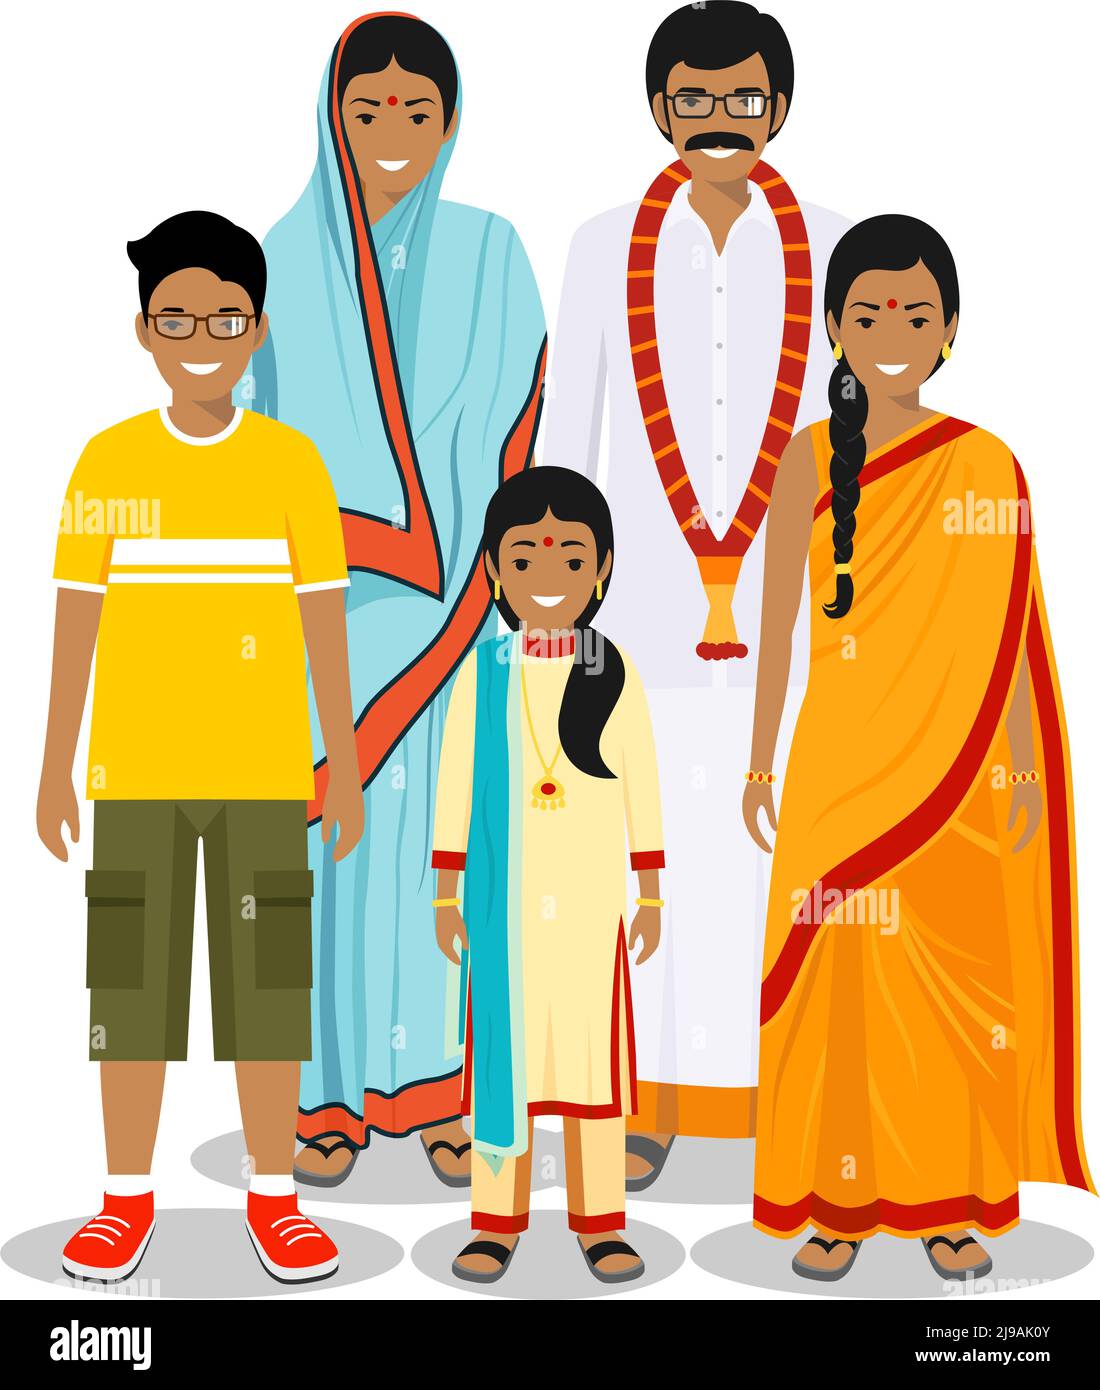 Generations man. Indian people father, mother, boy, girl standing together in traditional clothes. Social concept. Family concept. Stock Vector